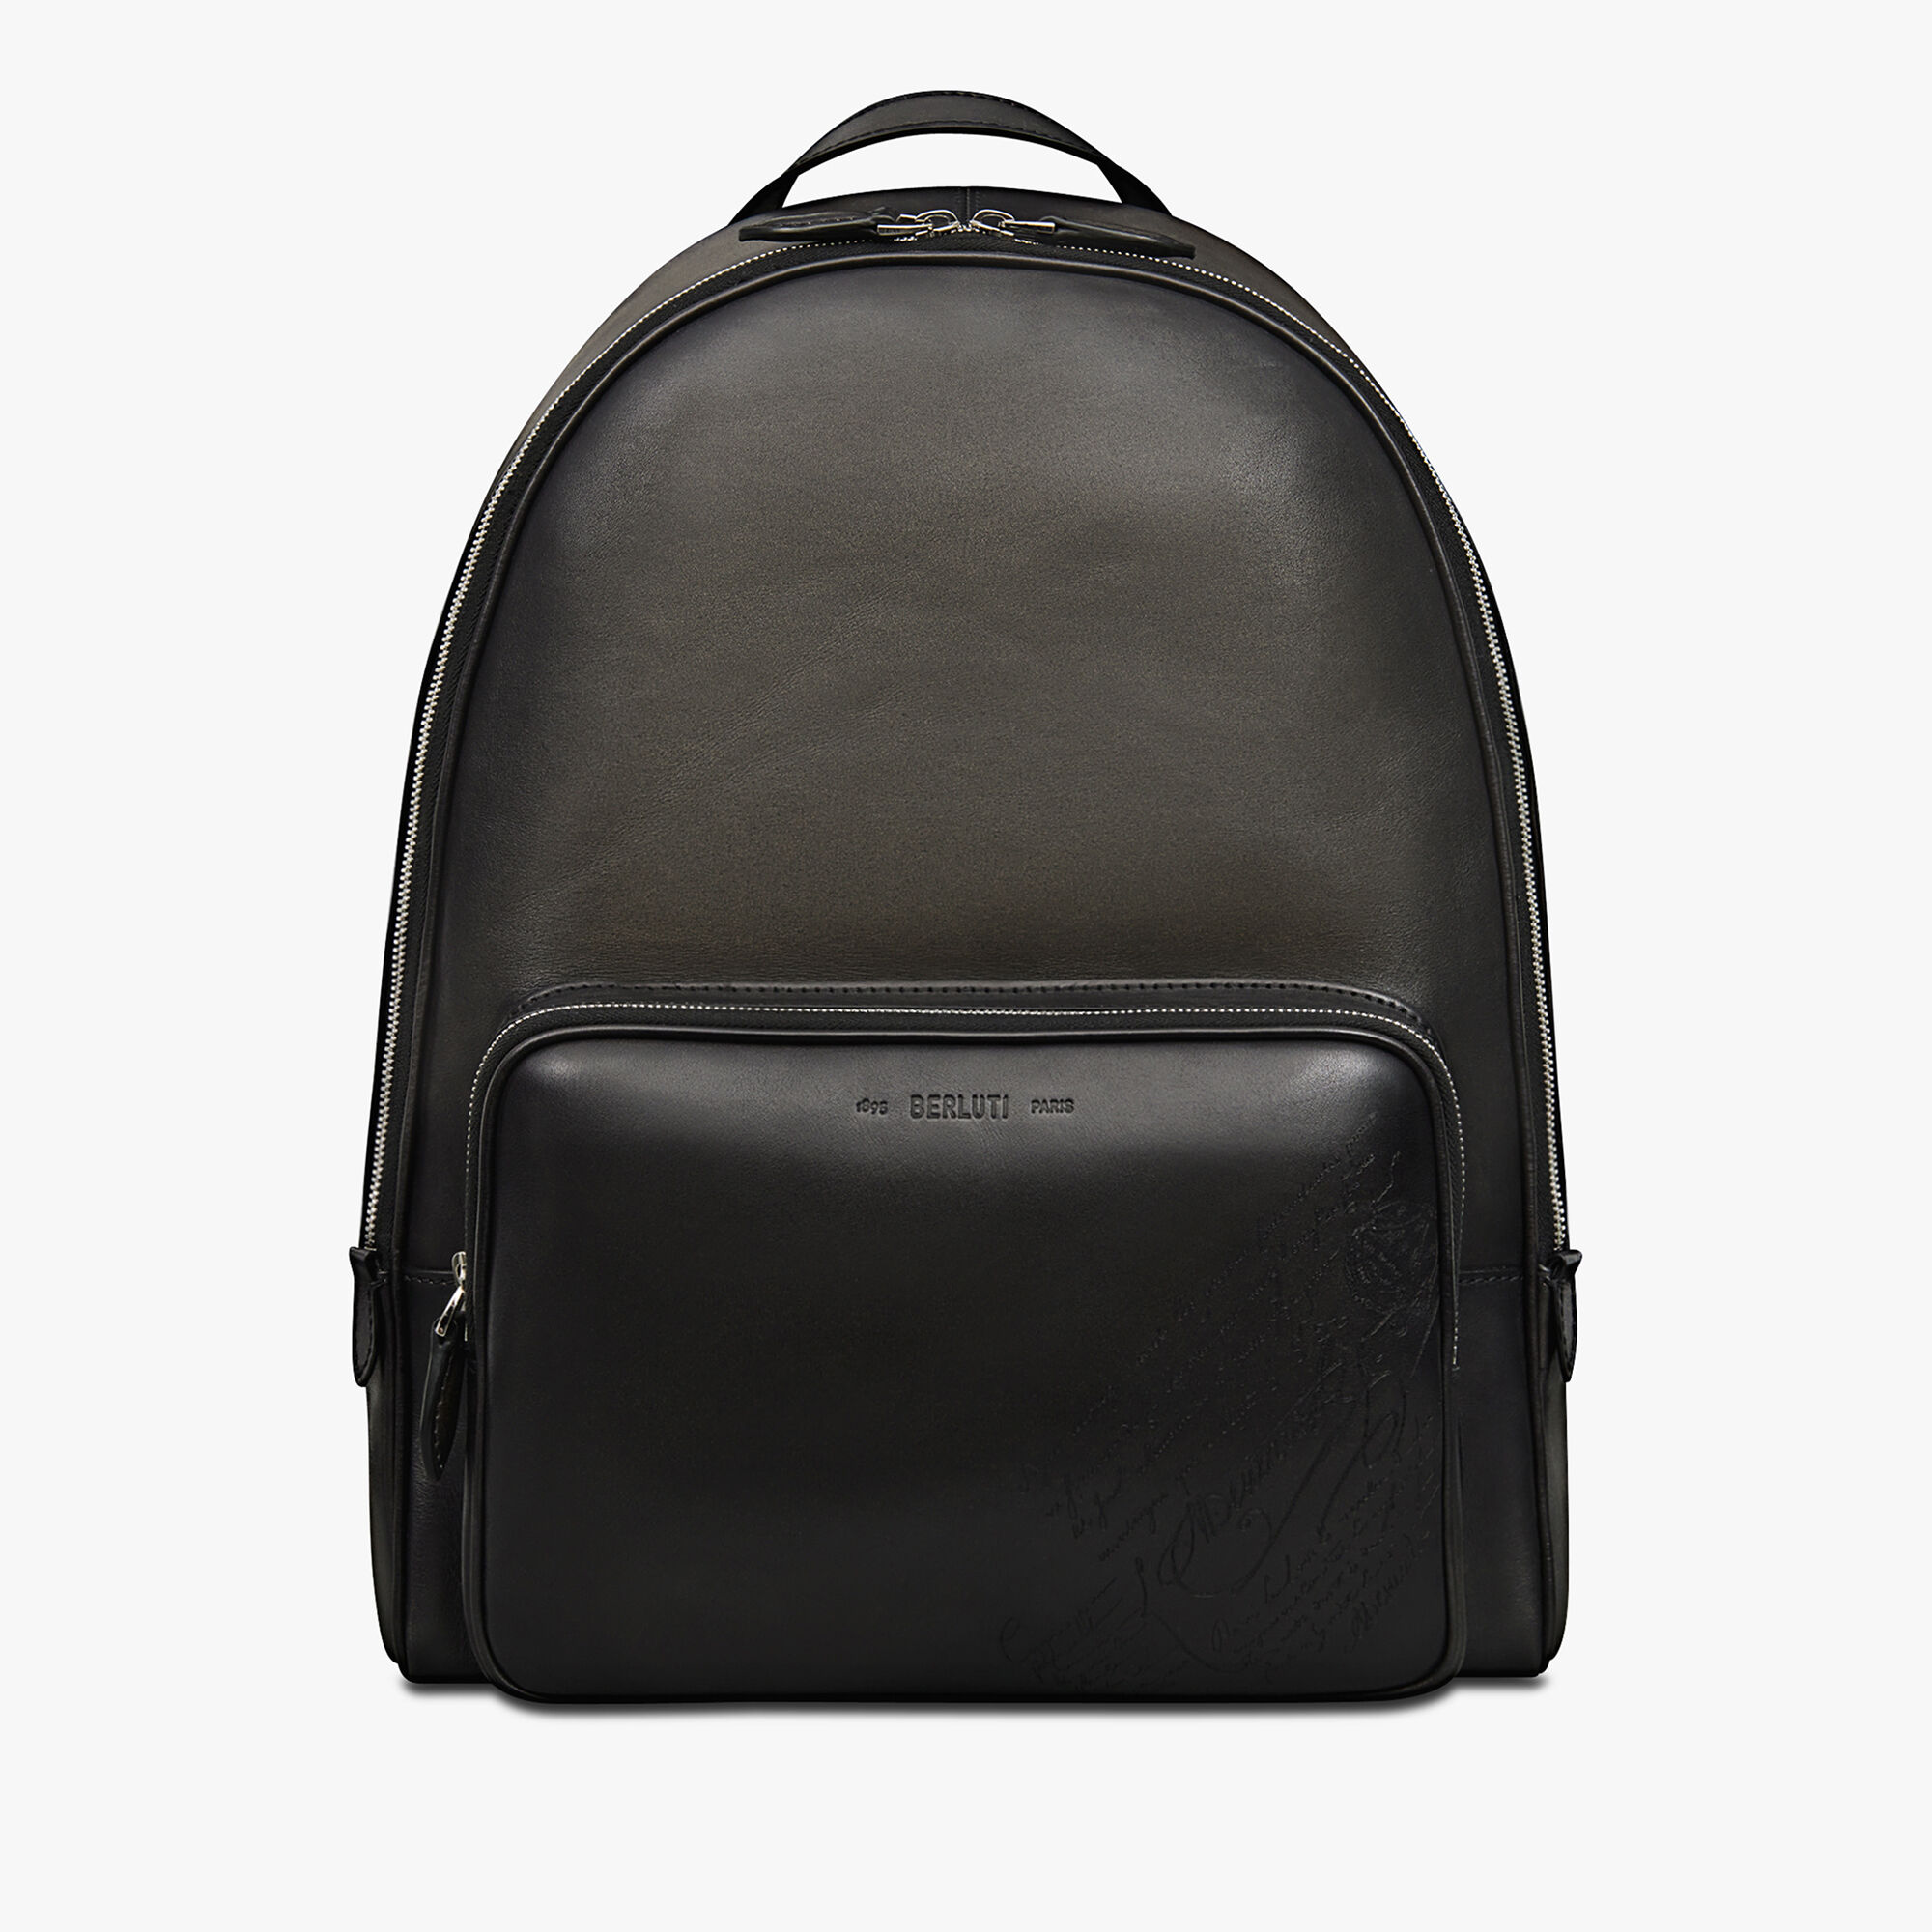 Backpack collections by Berluti